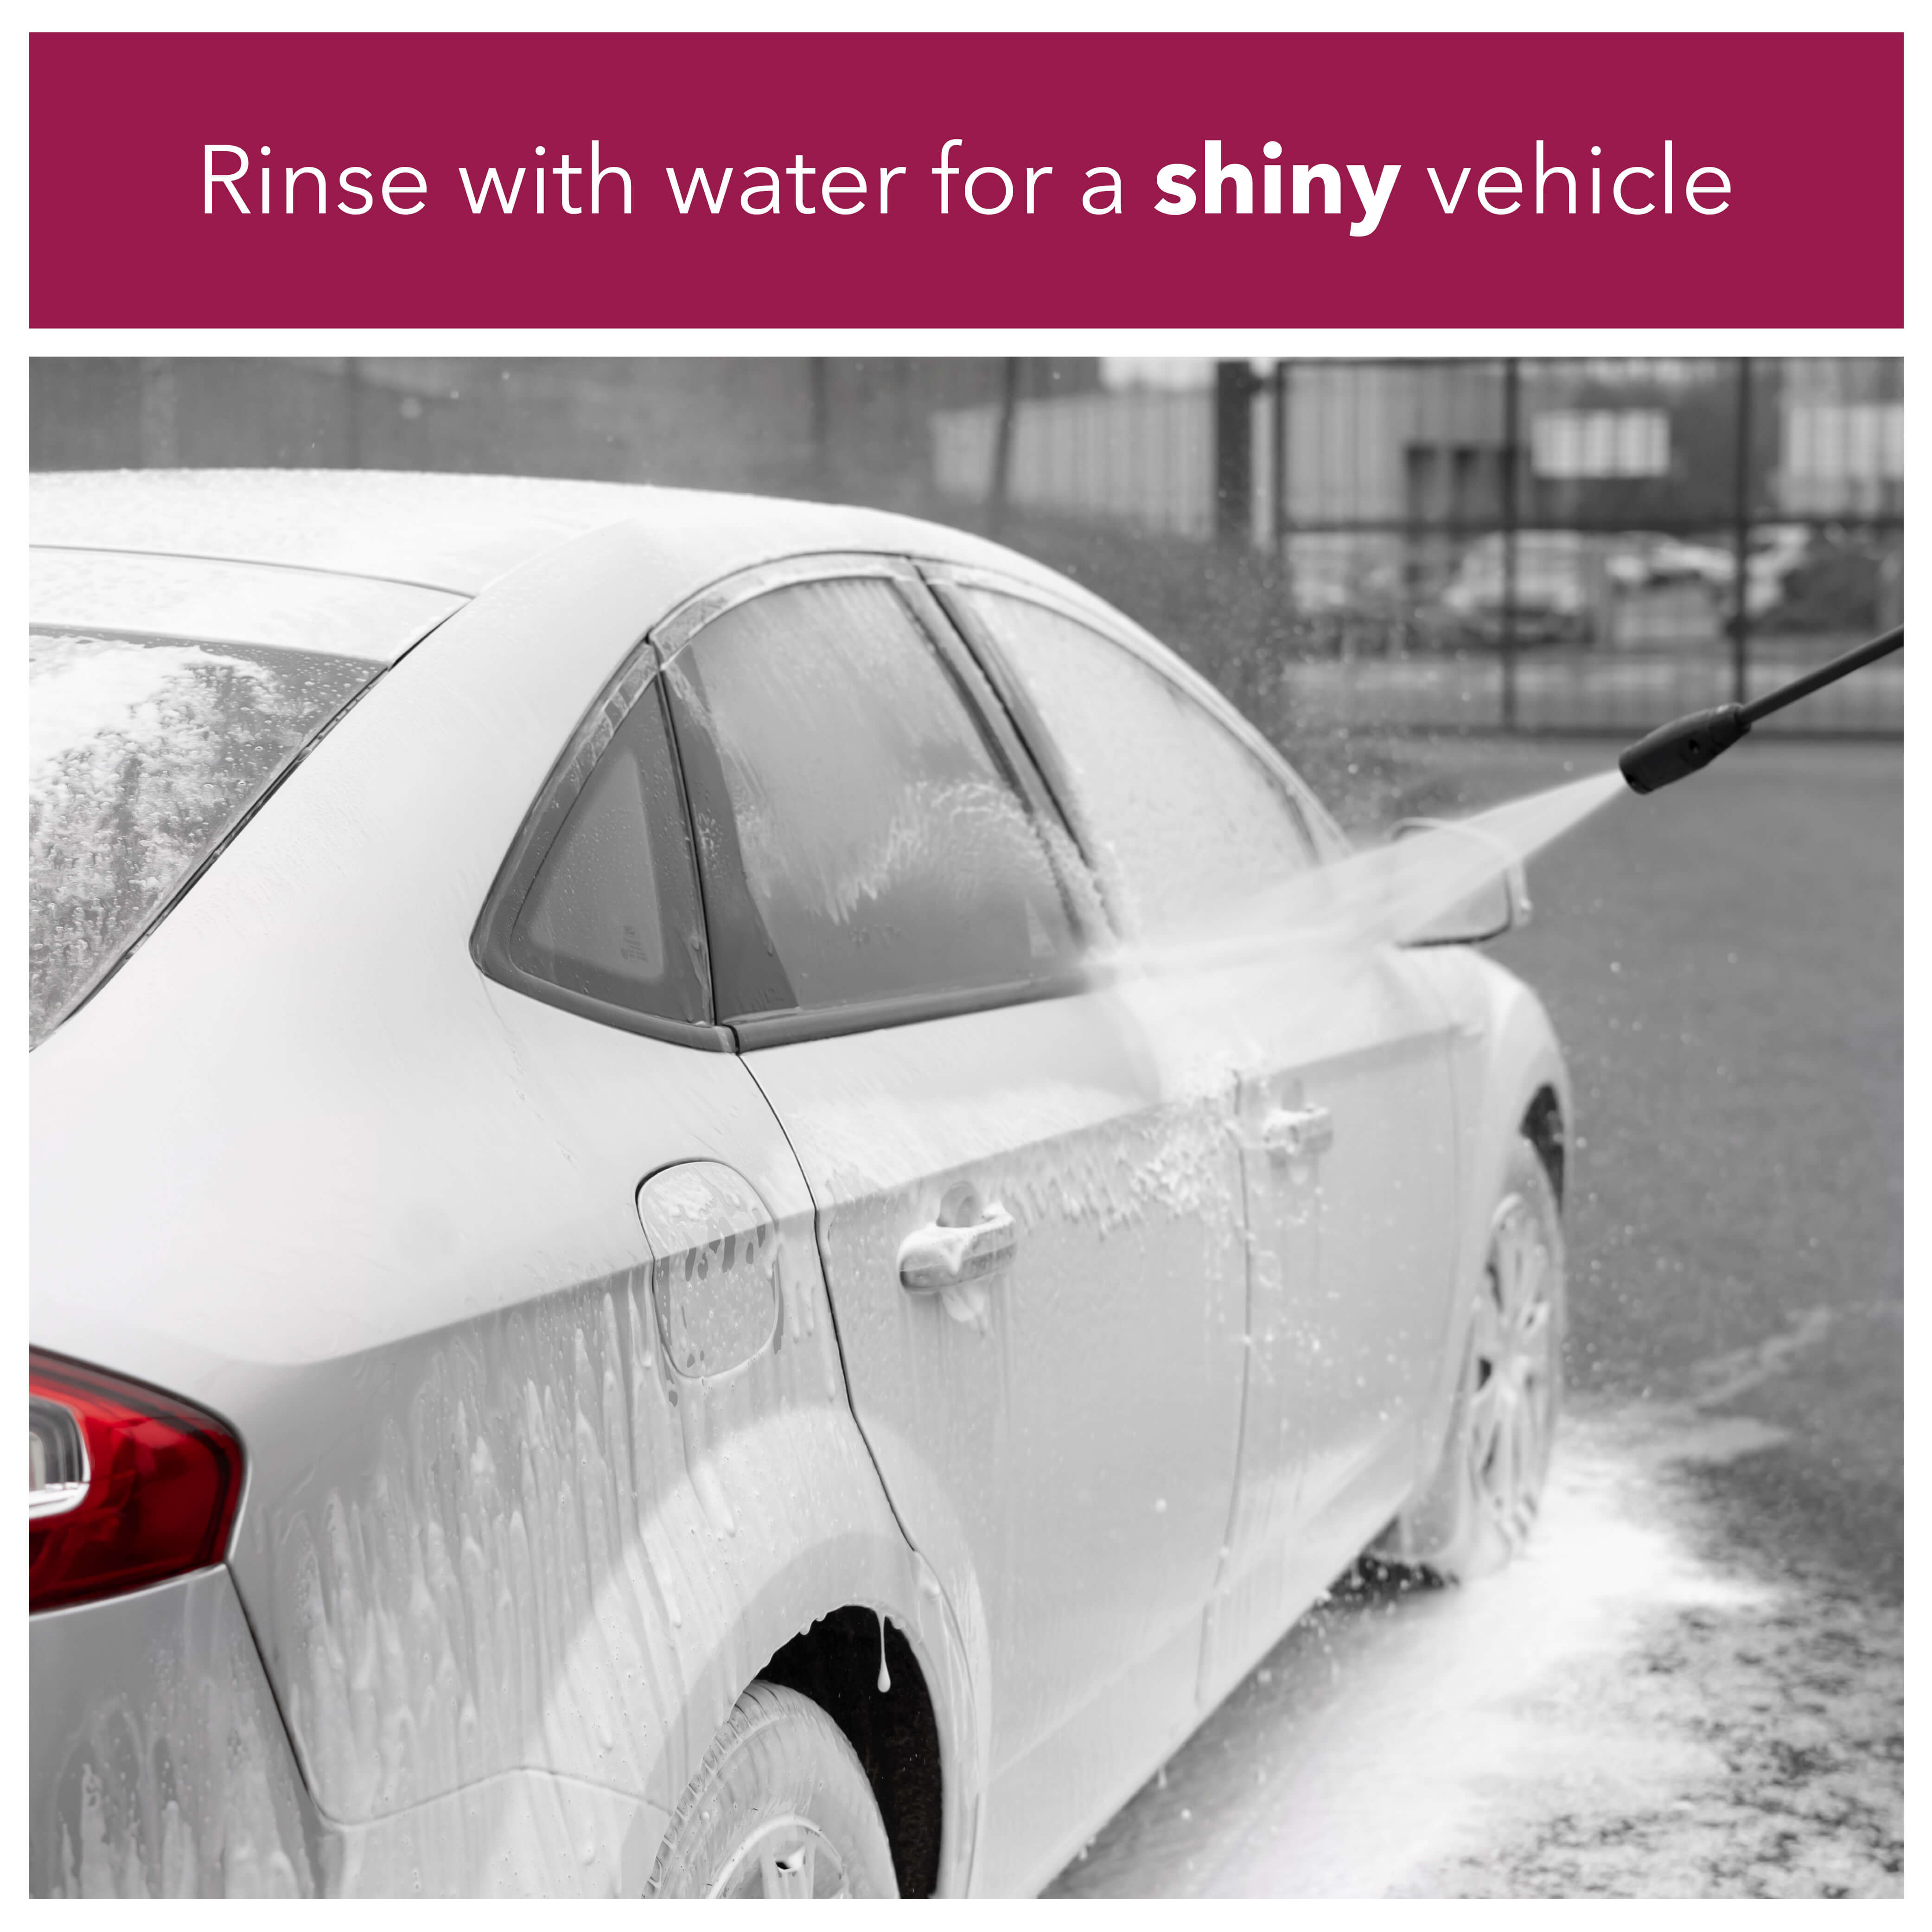 Rinse with water for a shiny vehicle 